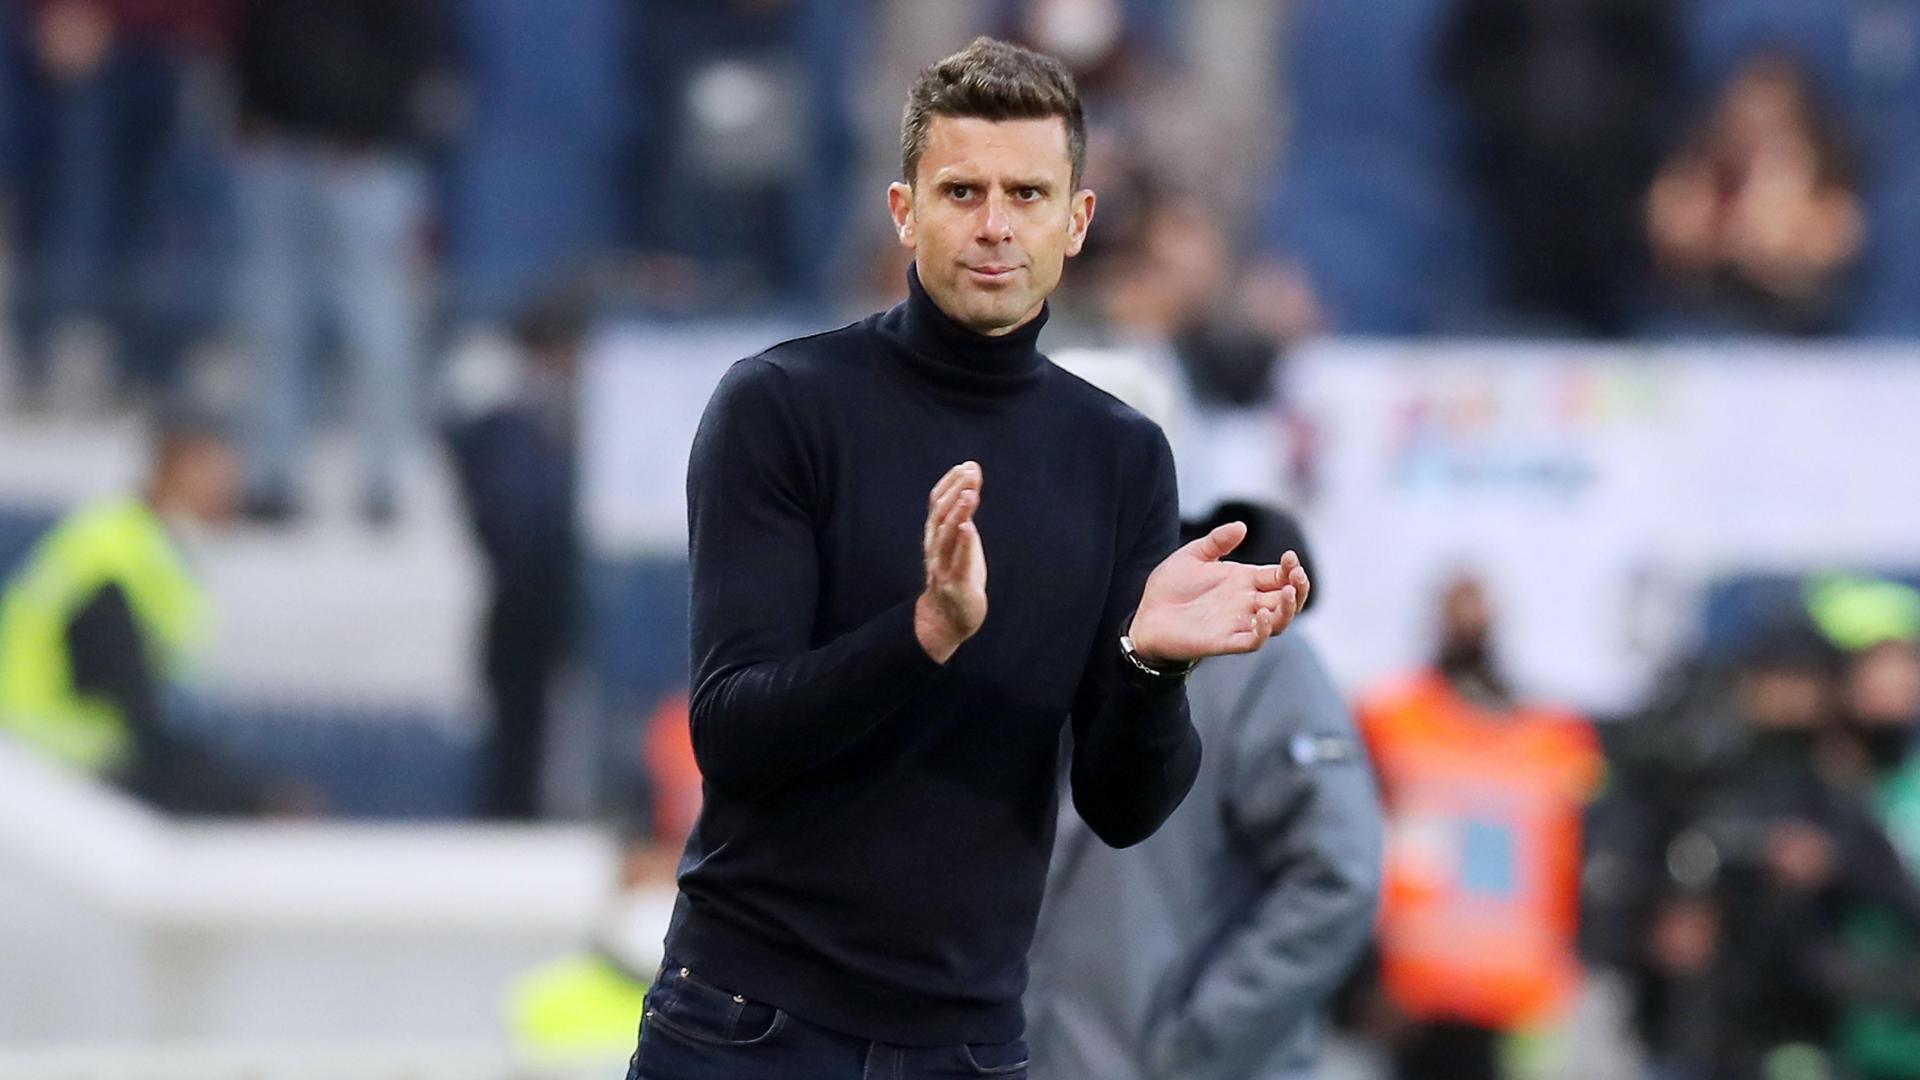 Thiago Motta: "Excessive result. Forward with courage and confidence